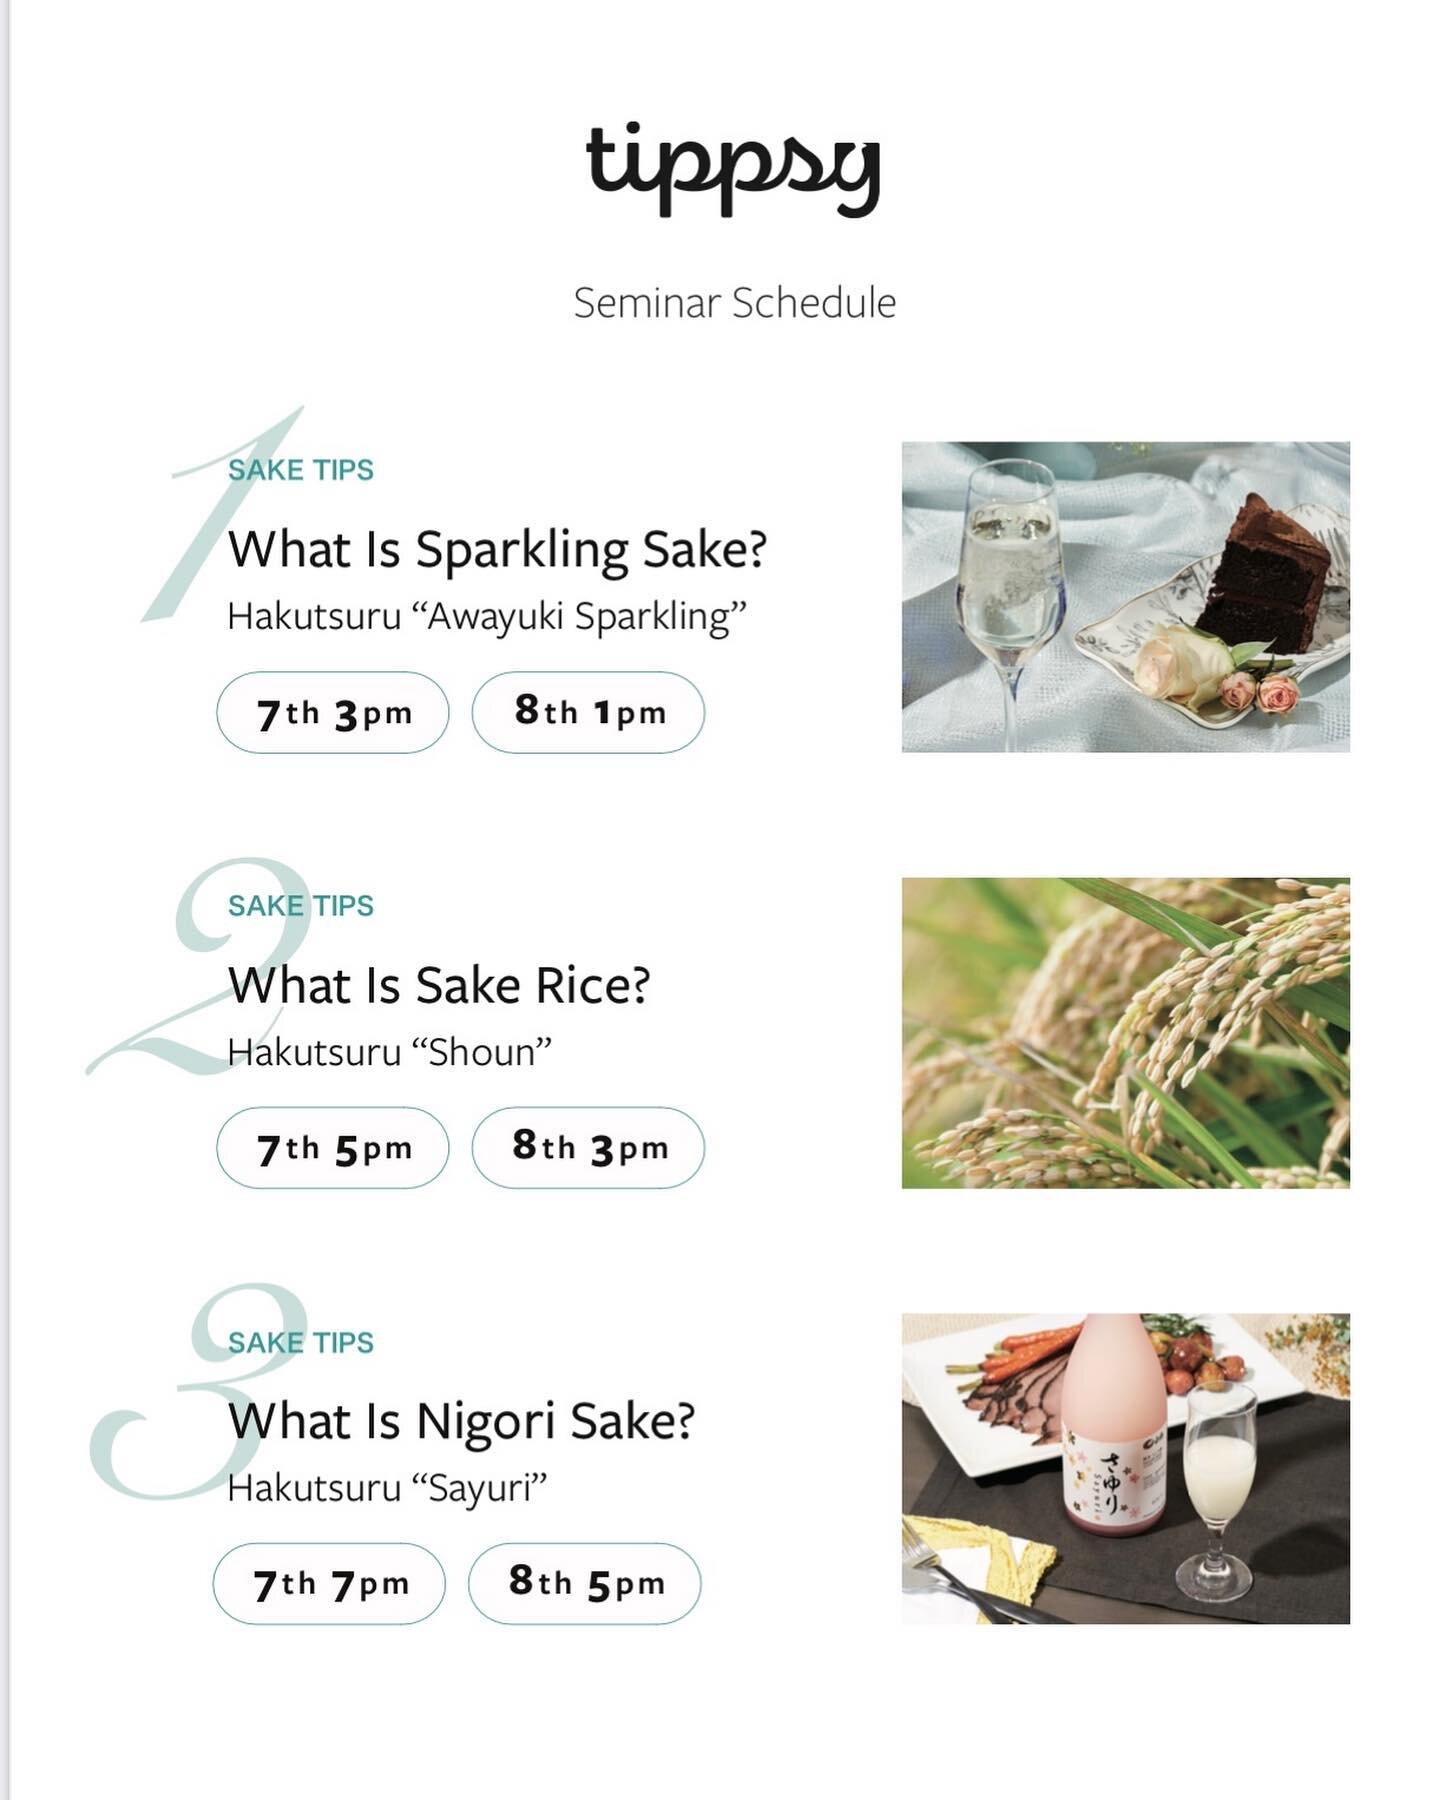 Don&rsquo;t miss out &ldquo;FREE&rdquo; Sake seminar with @tippsysake at Yokocho Area in Taste of Japan event! Please mark it on your calendar. Event tickets are available at https://www.tasteofjpn.com